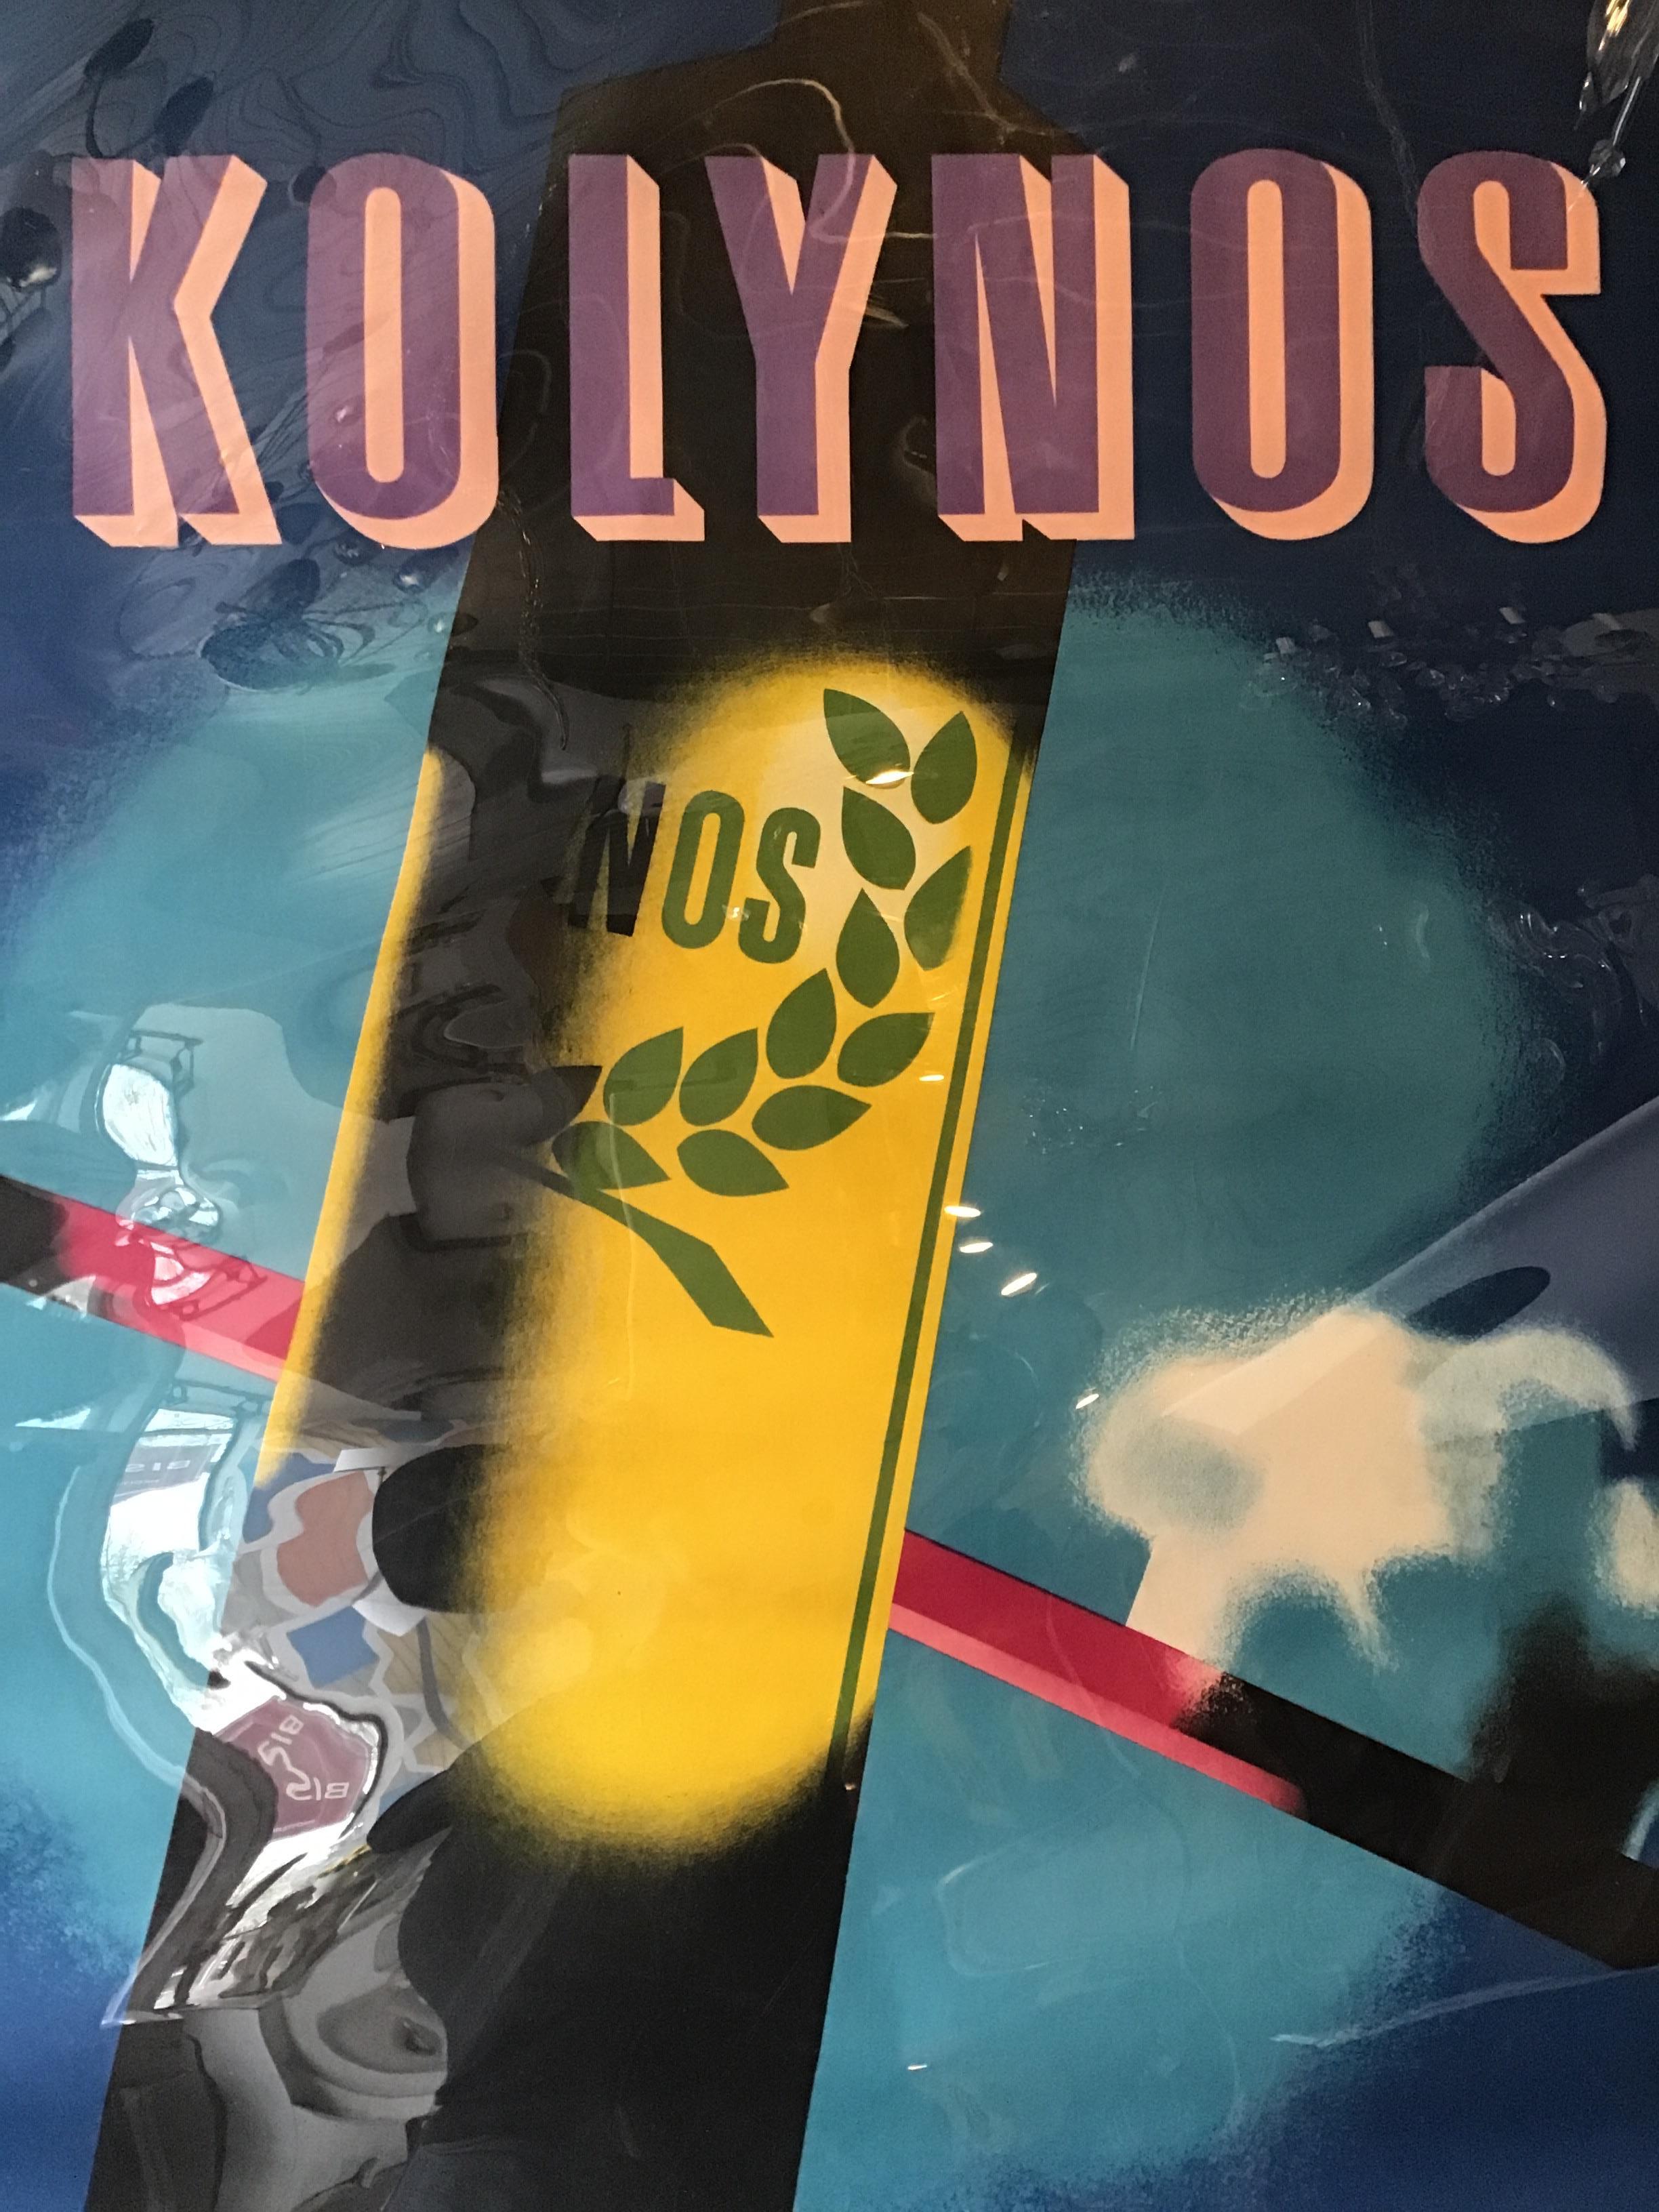 1940s Kolynos toothpaste advertisement poster. Printed by Wassermann.